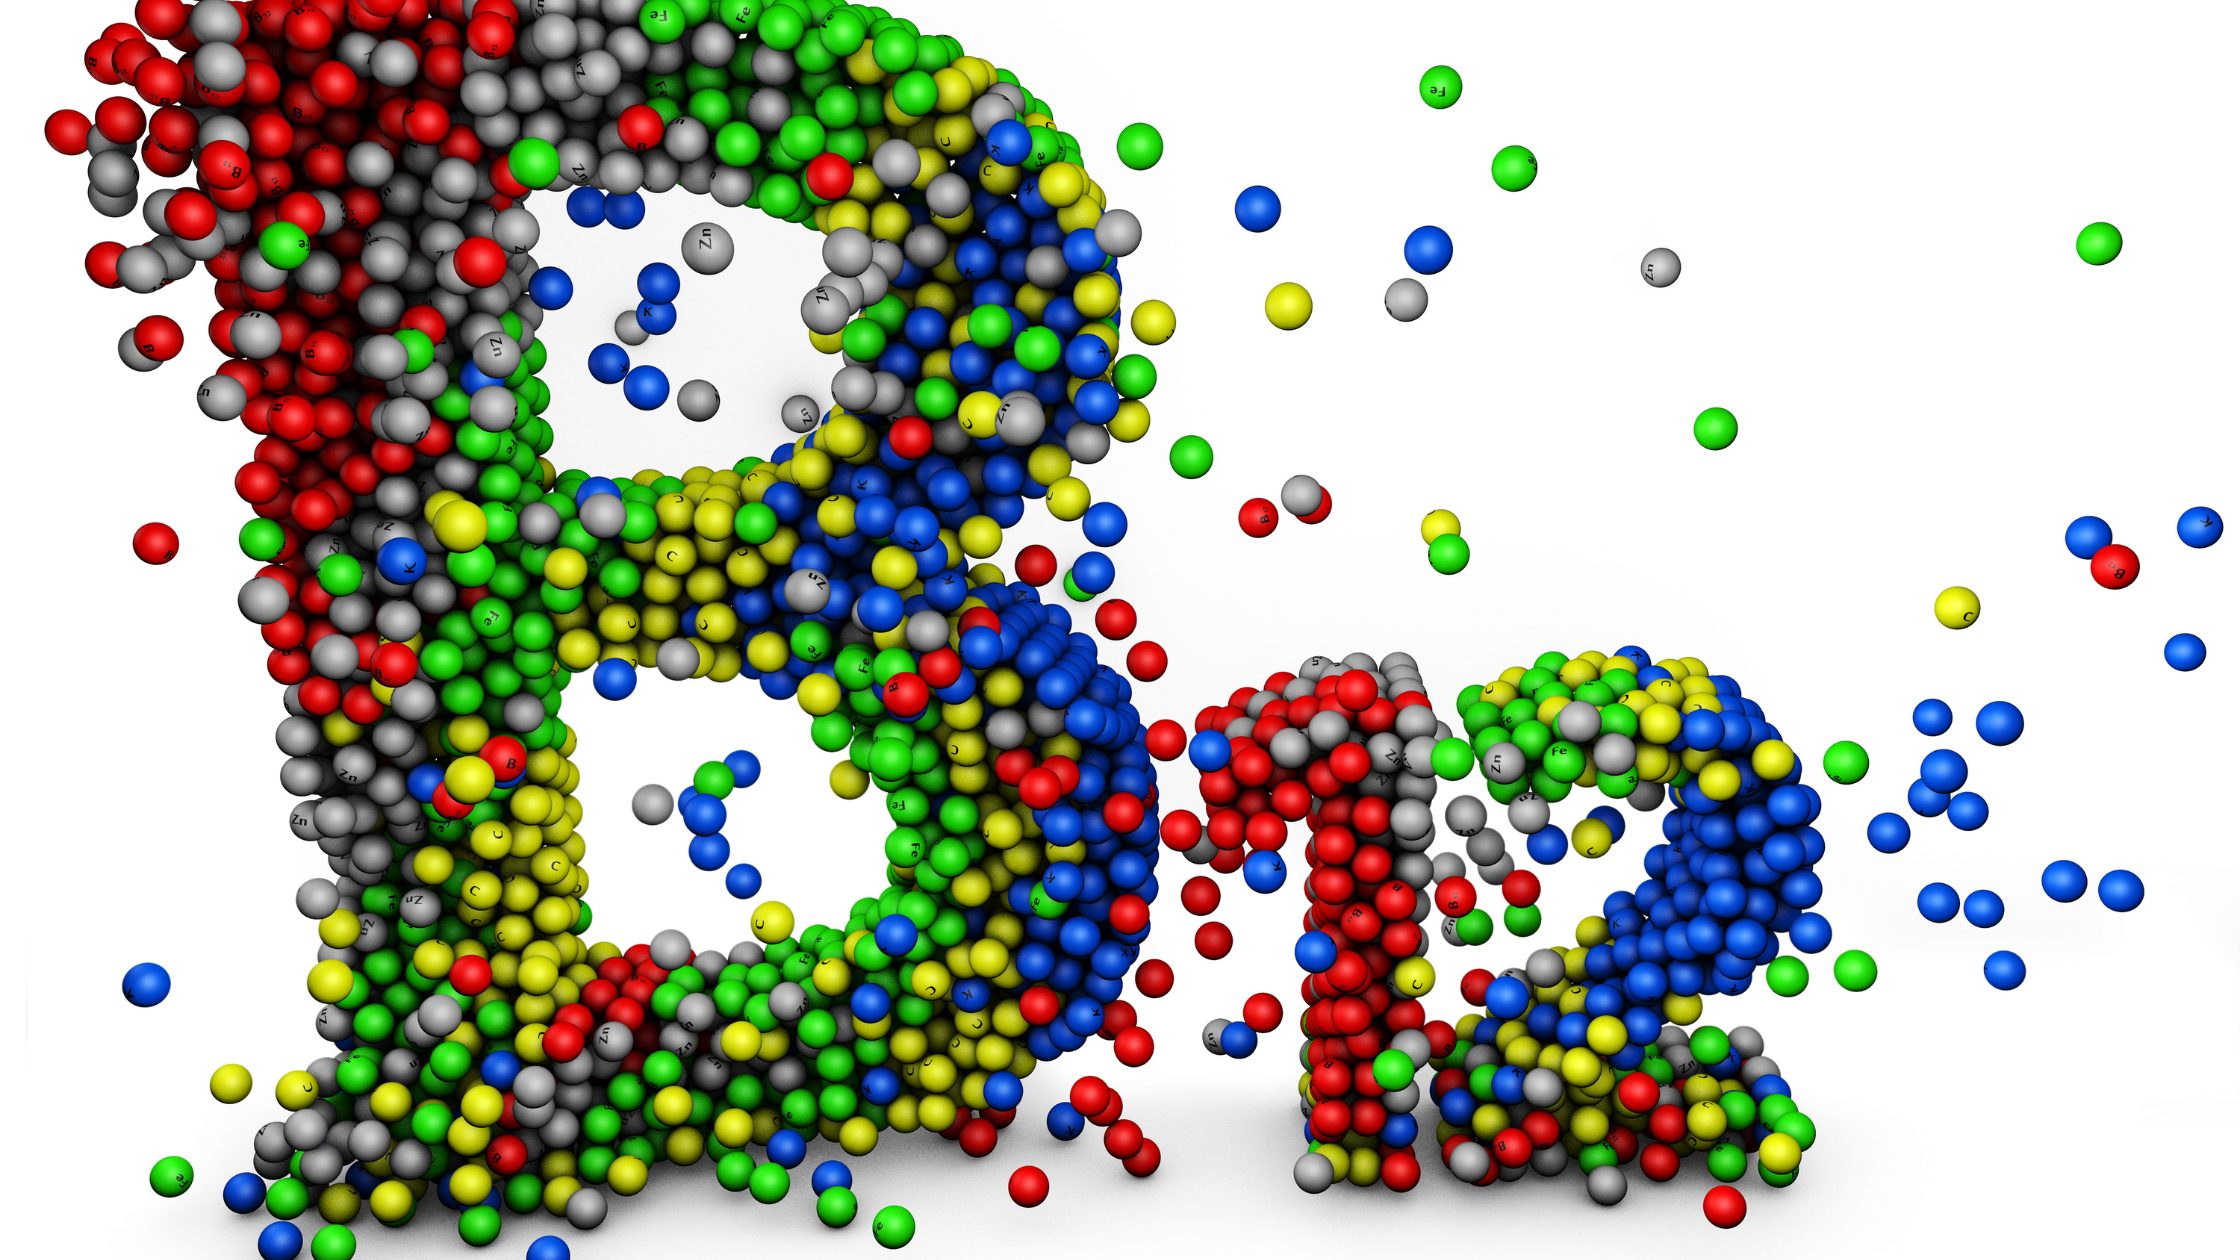 colorful blobs form the letters "B 12"